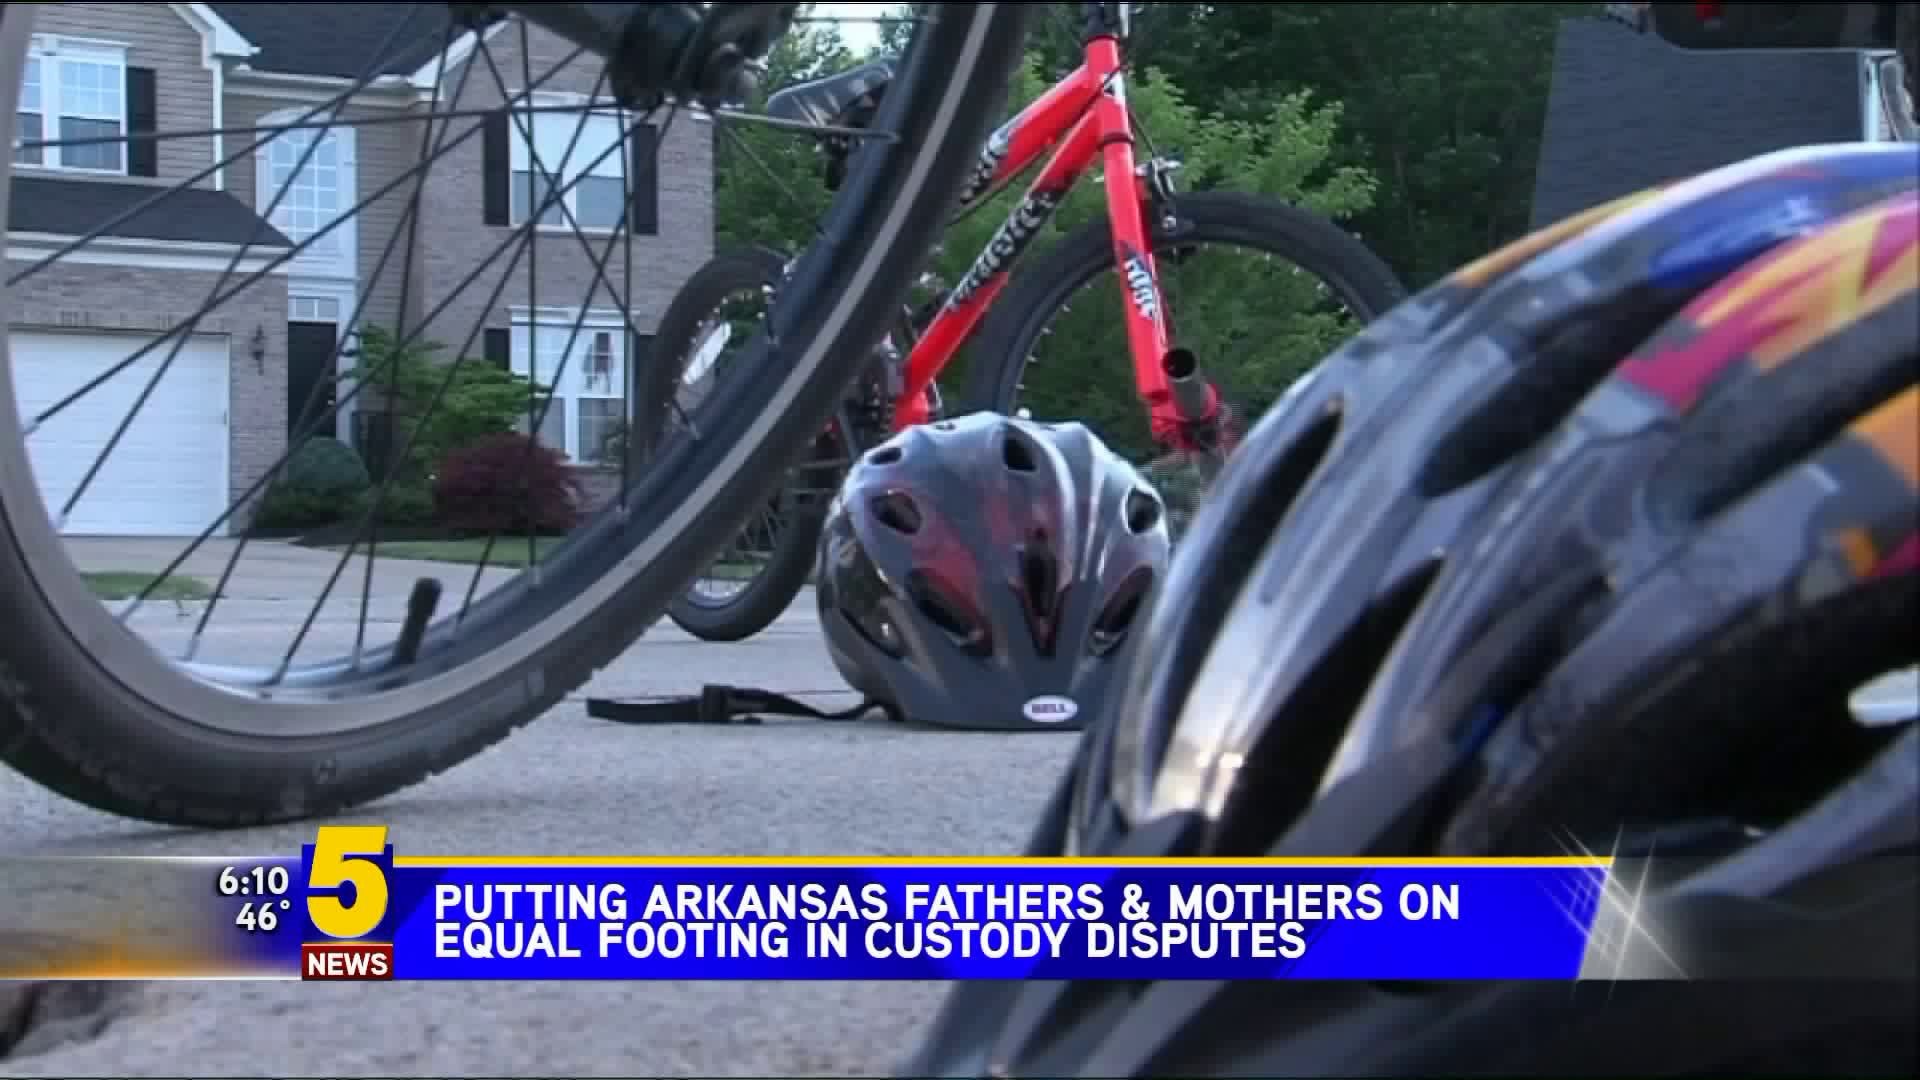 Putting Arkansas Fathers & Mothers On Equal Footing In Custody Disputes